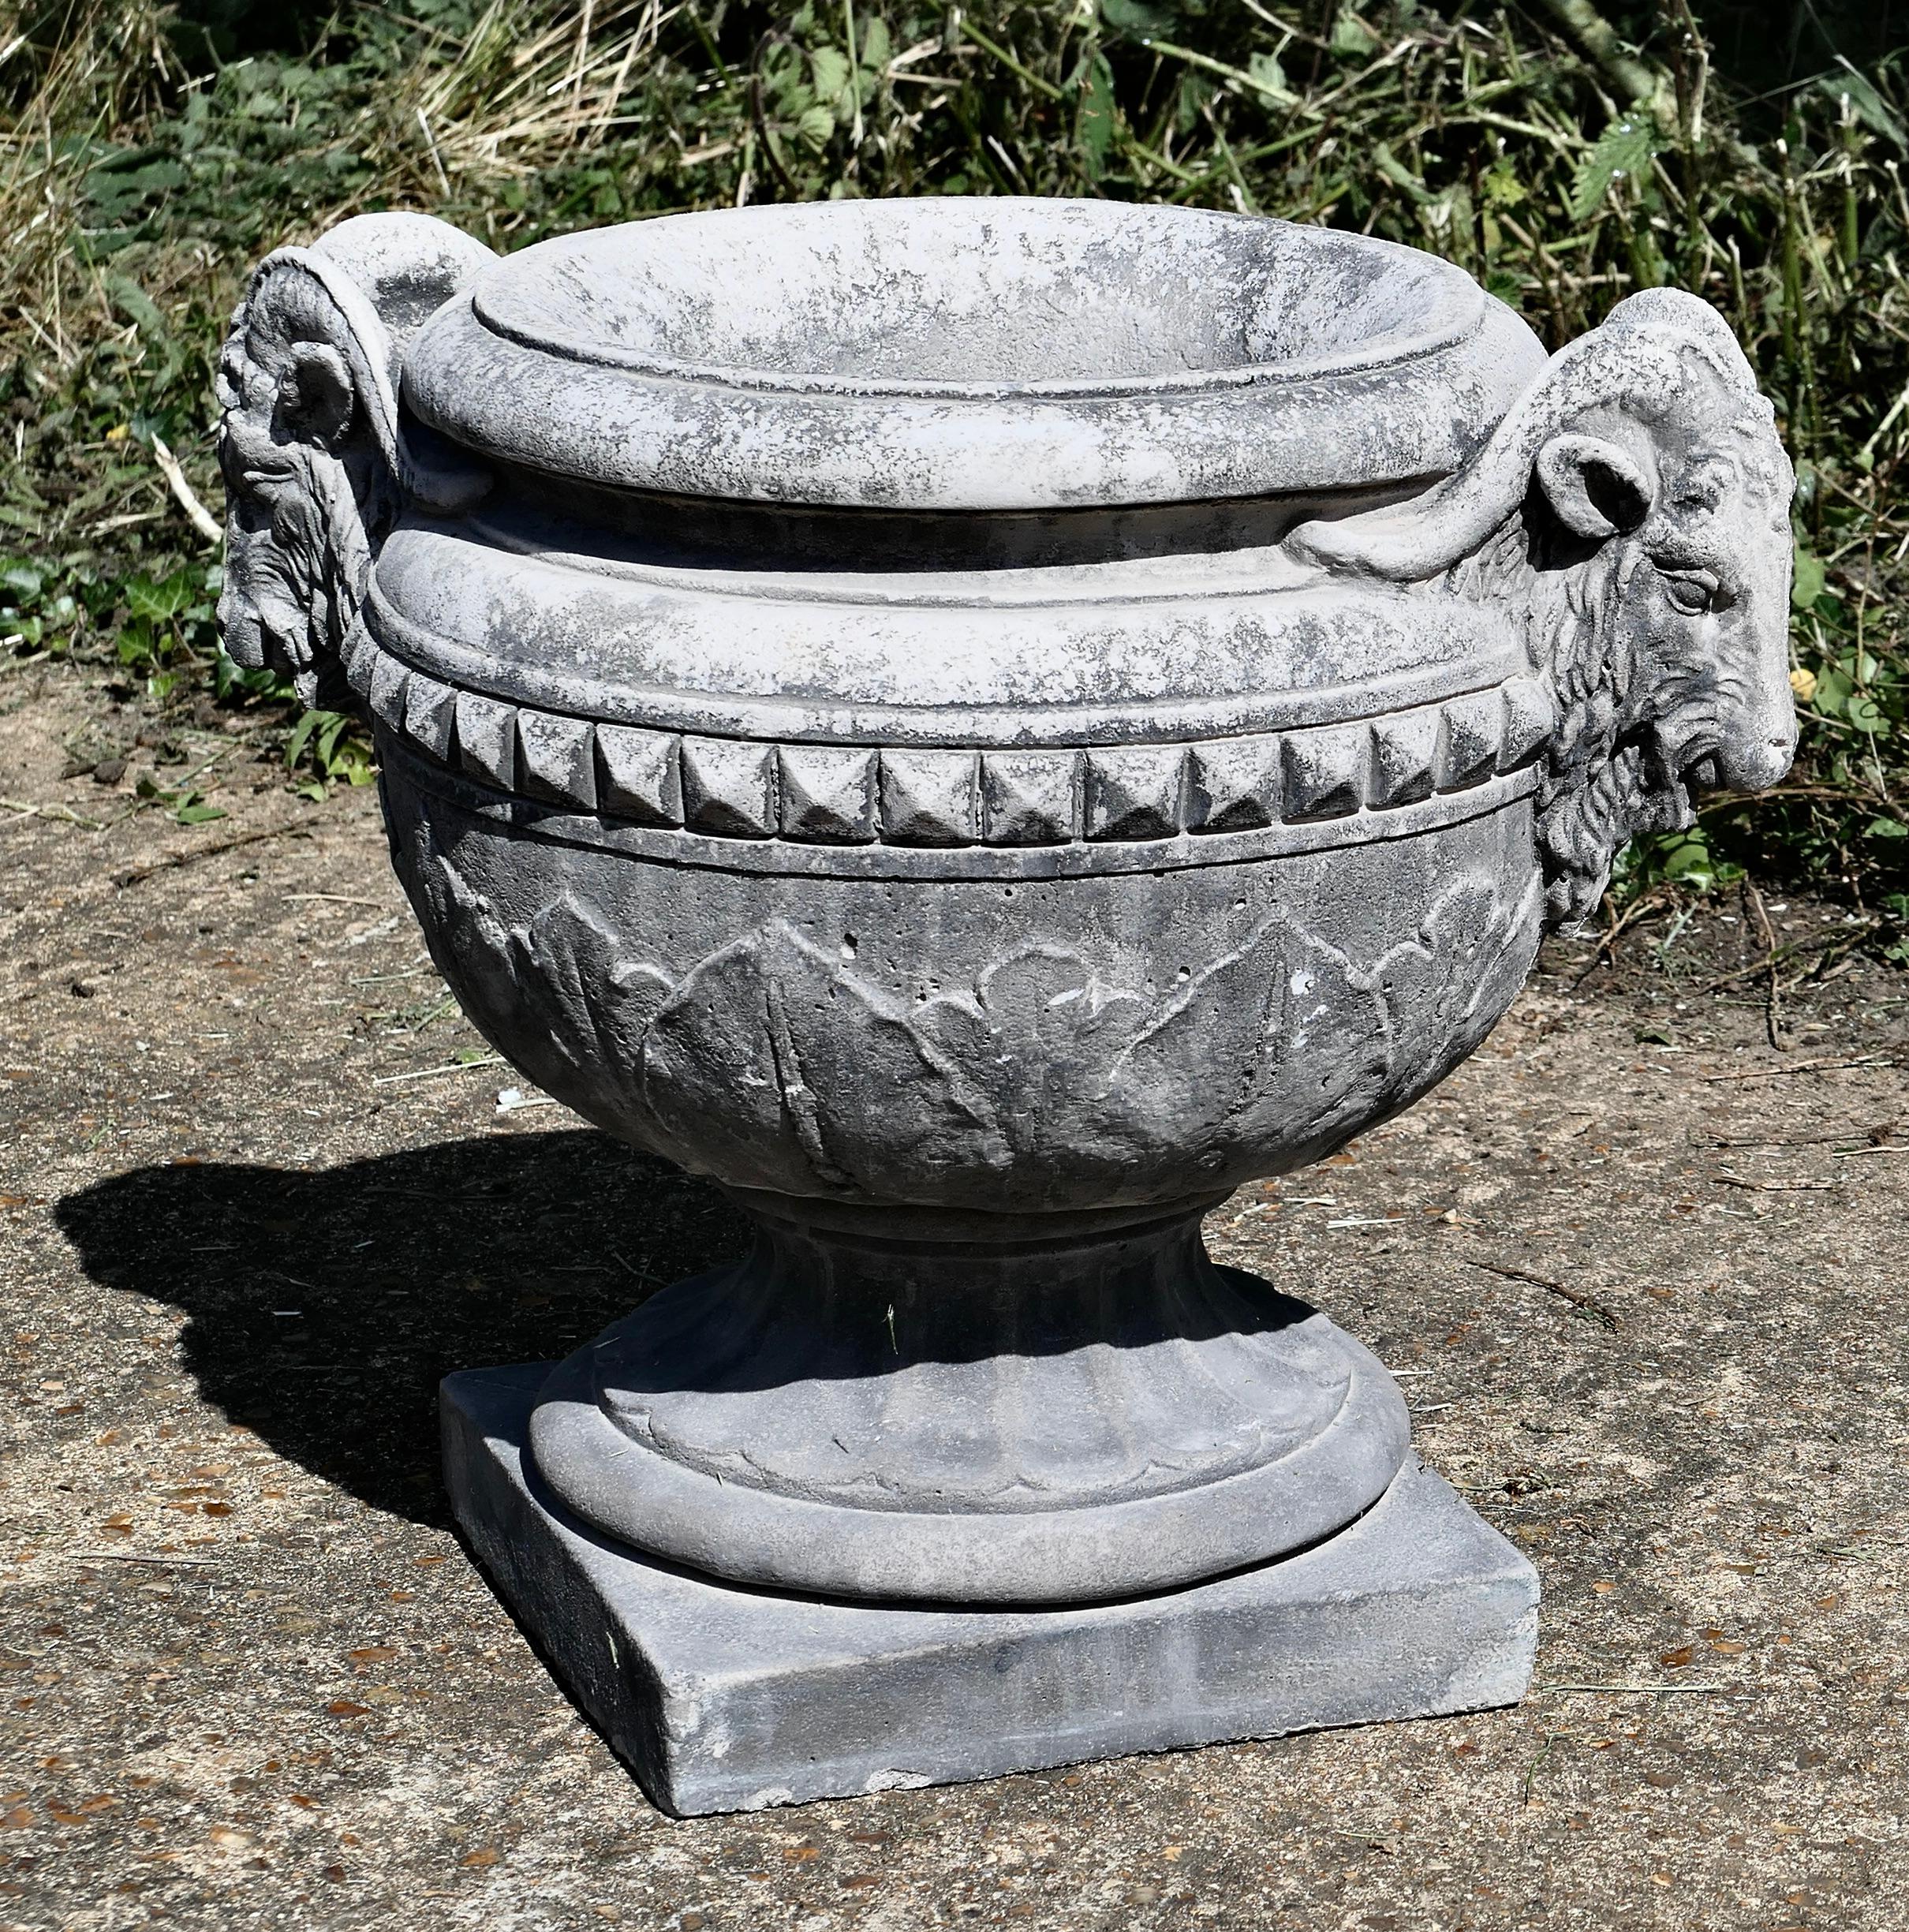 Heavy Garden Urn Ram’s Head Planter


Beautifull Garden Urn decorated with Ram’s heads, one at each side 
The Urn is in good Condition and this one is Very Heavy

The Urn is  18” tall, 21” at the wides widest and the base is 21” square
 WD141